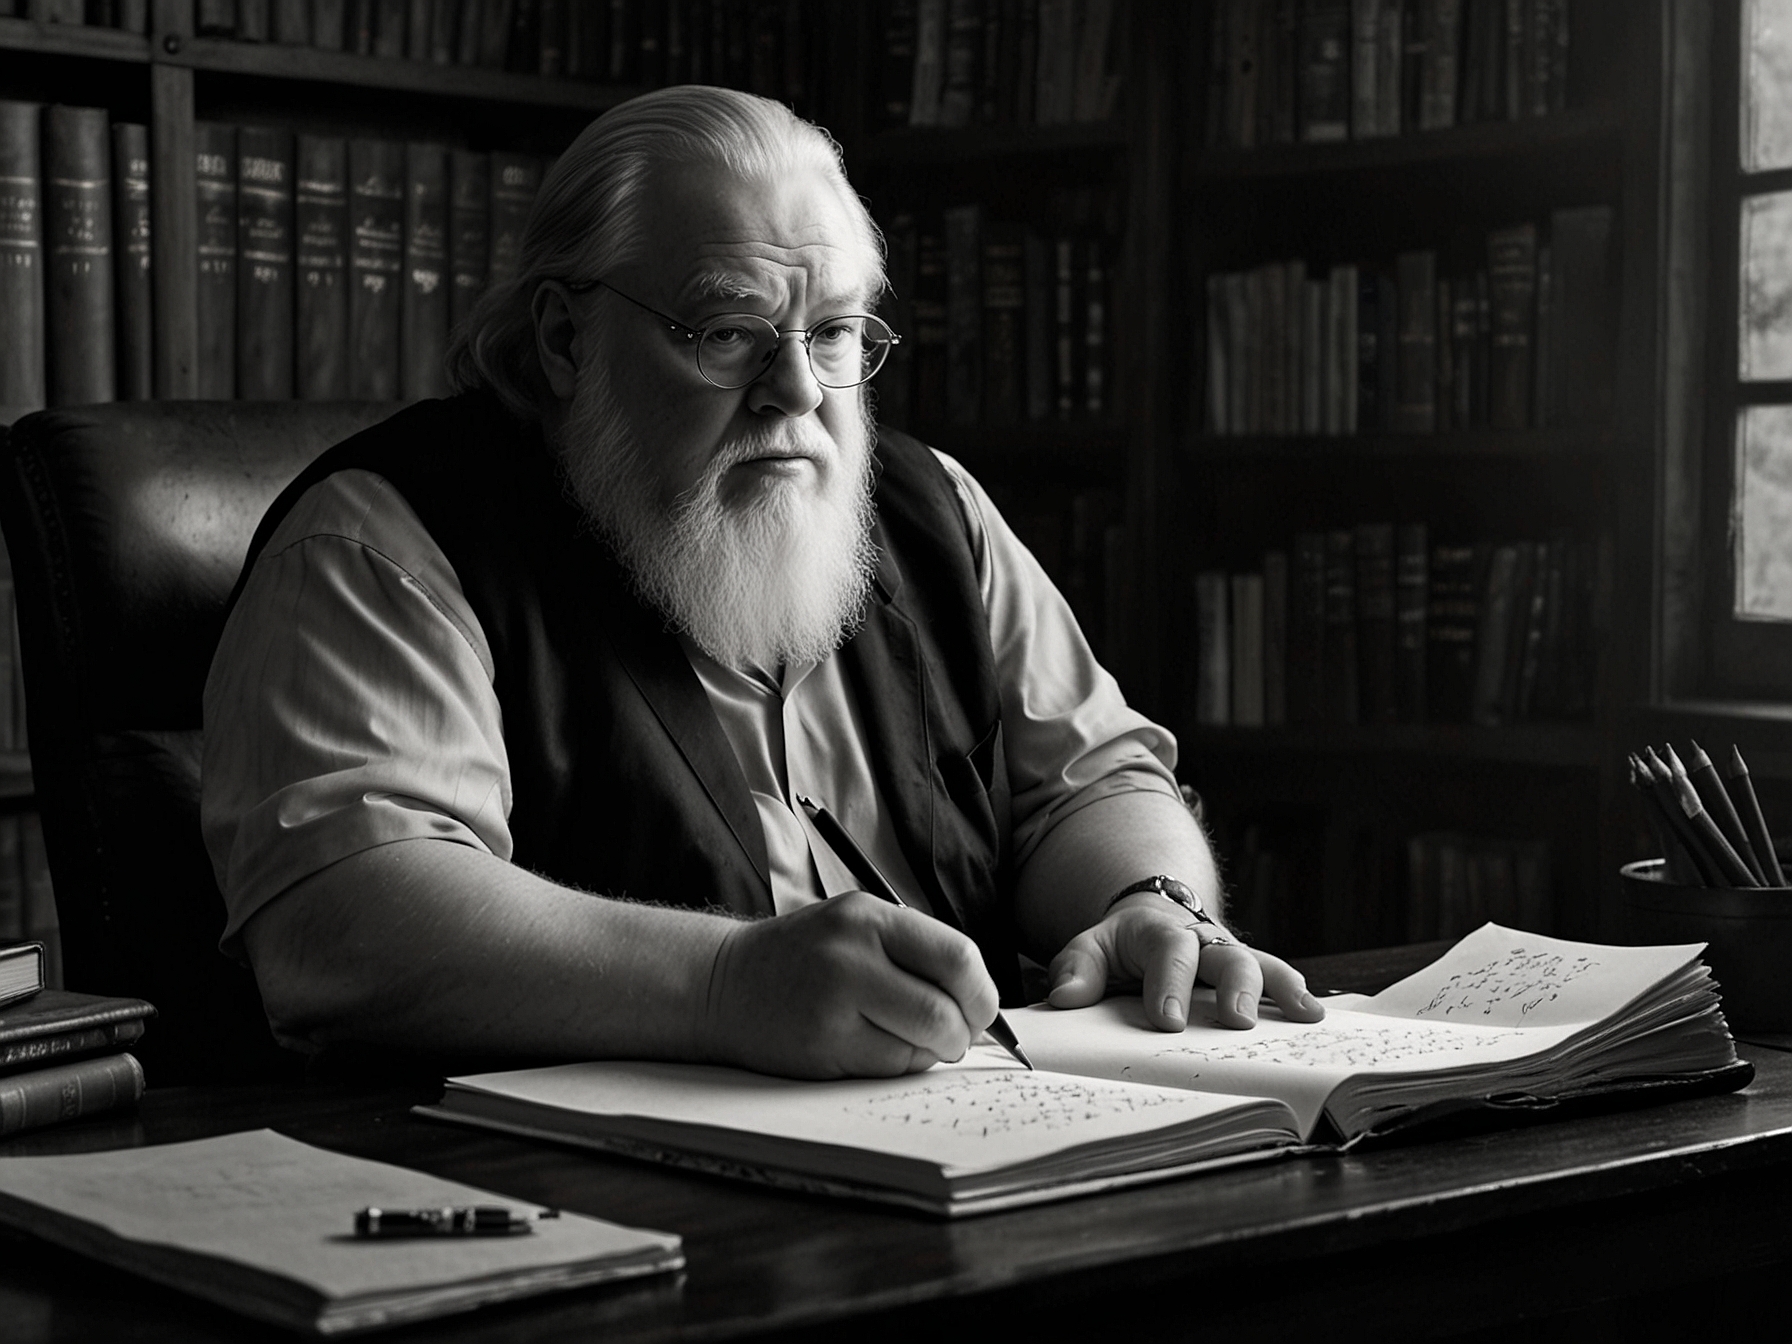 An image of George RR Martin writing at his desk, with a mysterious expression, reflecting his cryptic message about the potential Elden Ring adaptation.